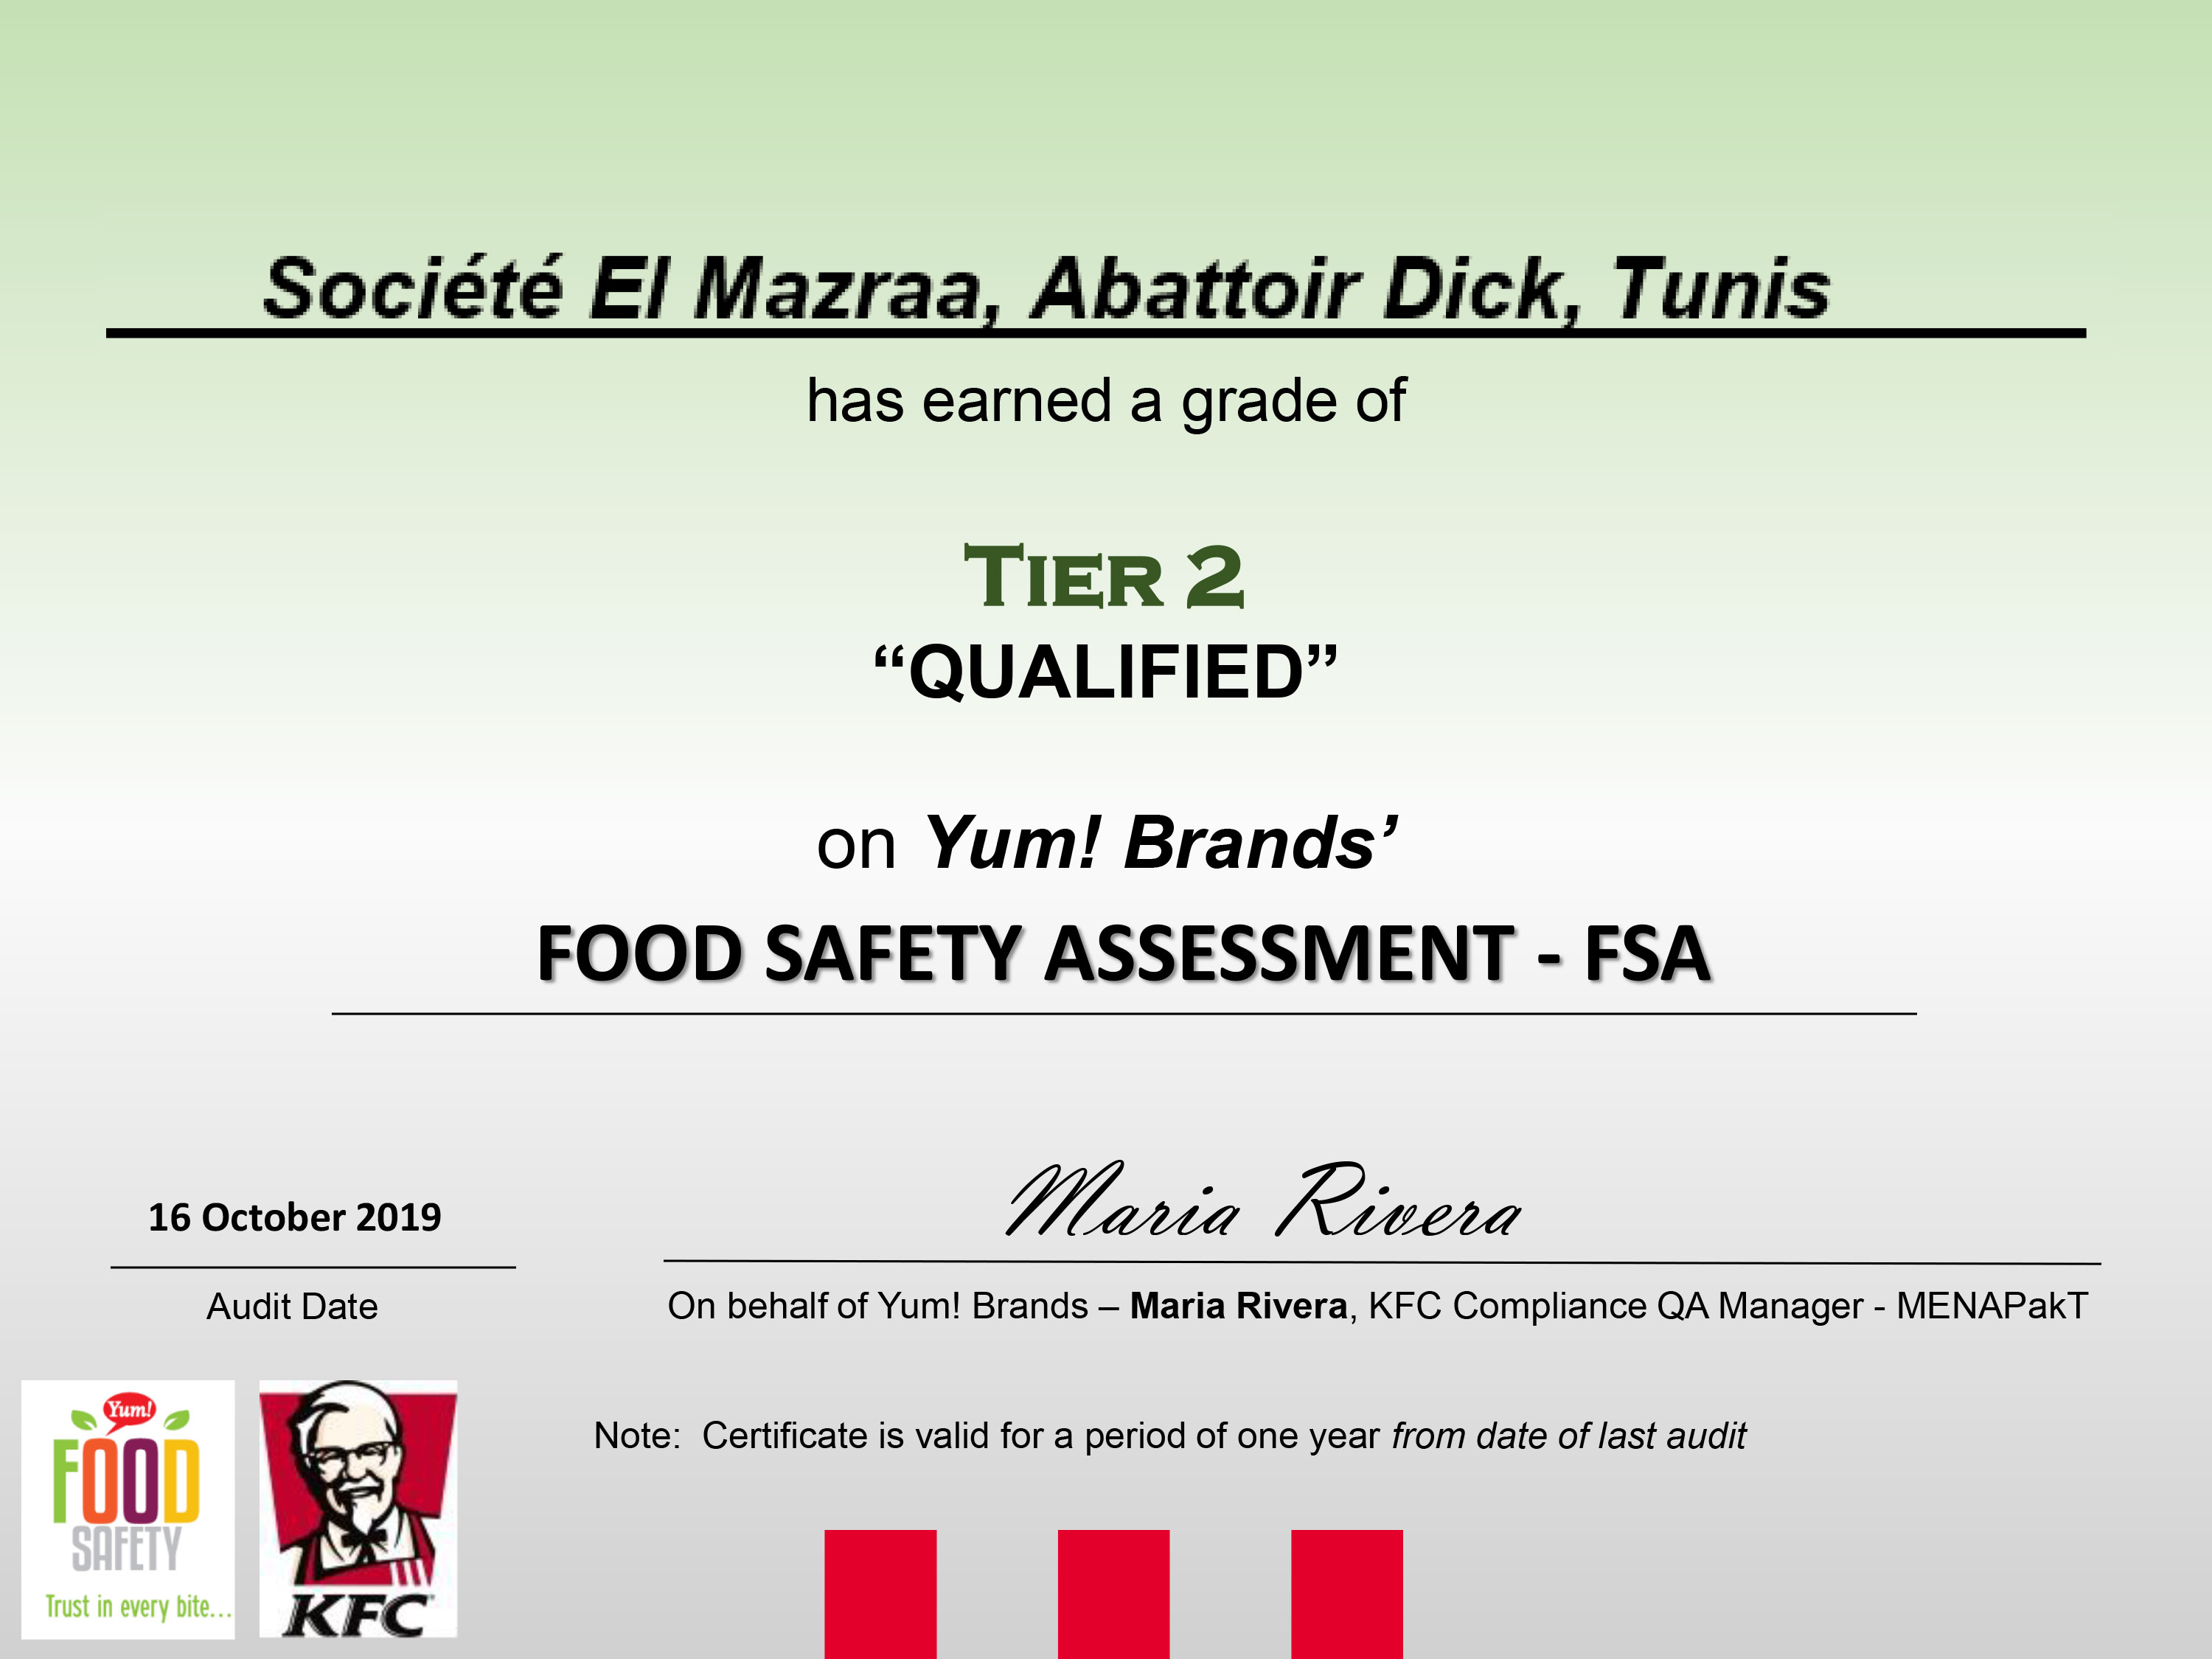 Grade of Tier 2 « Qualified » on Yum! Brands’